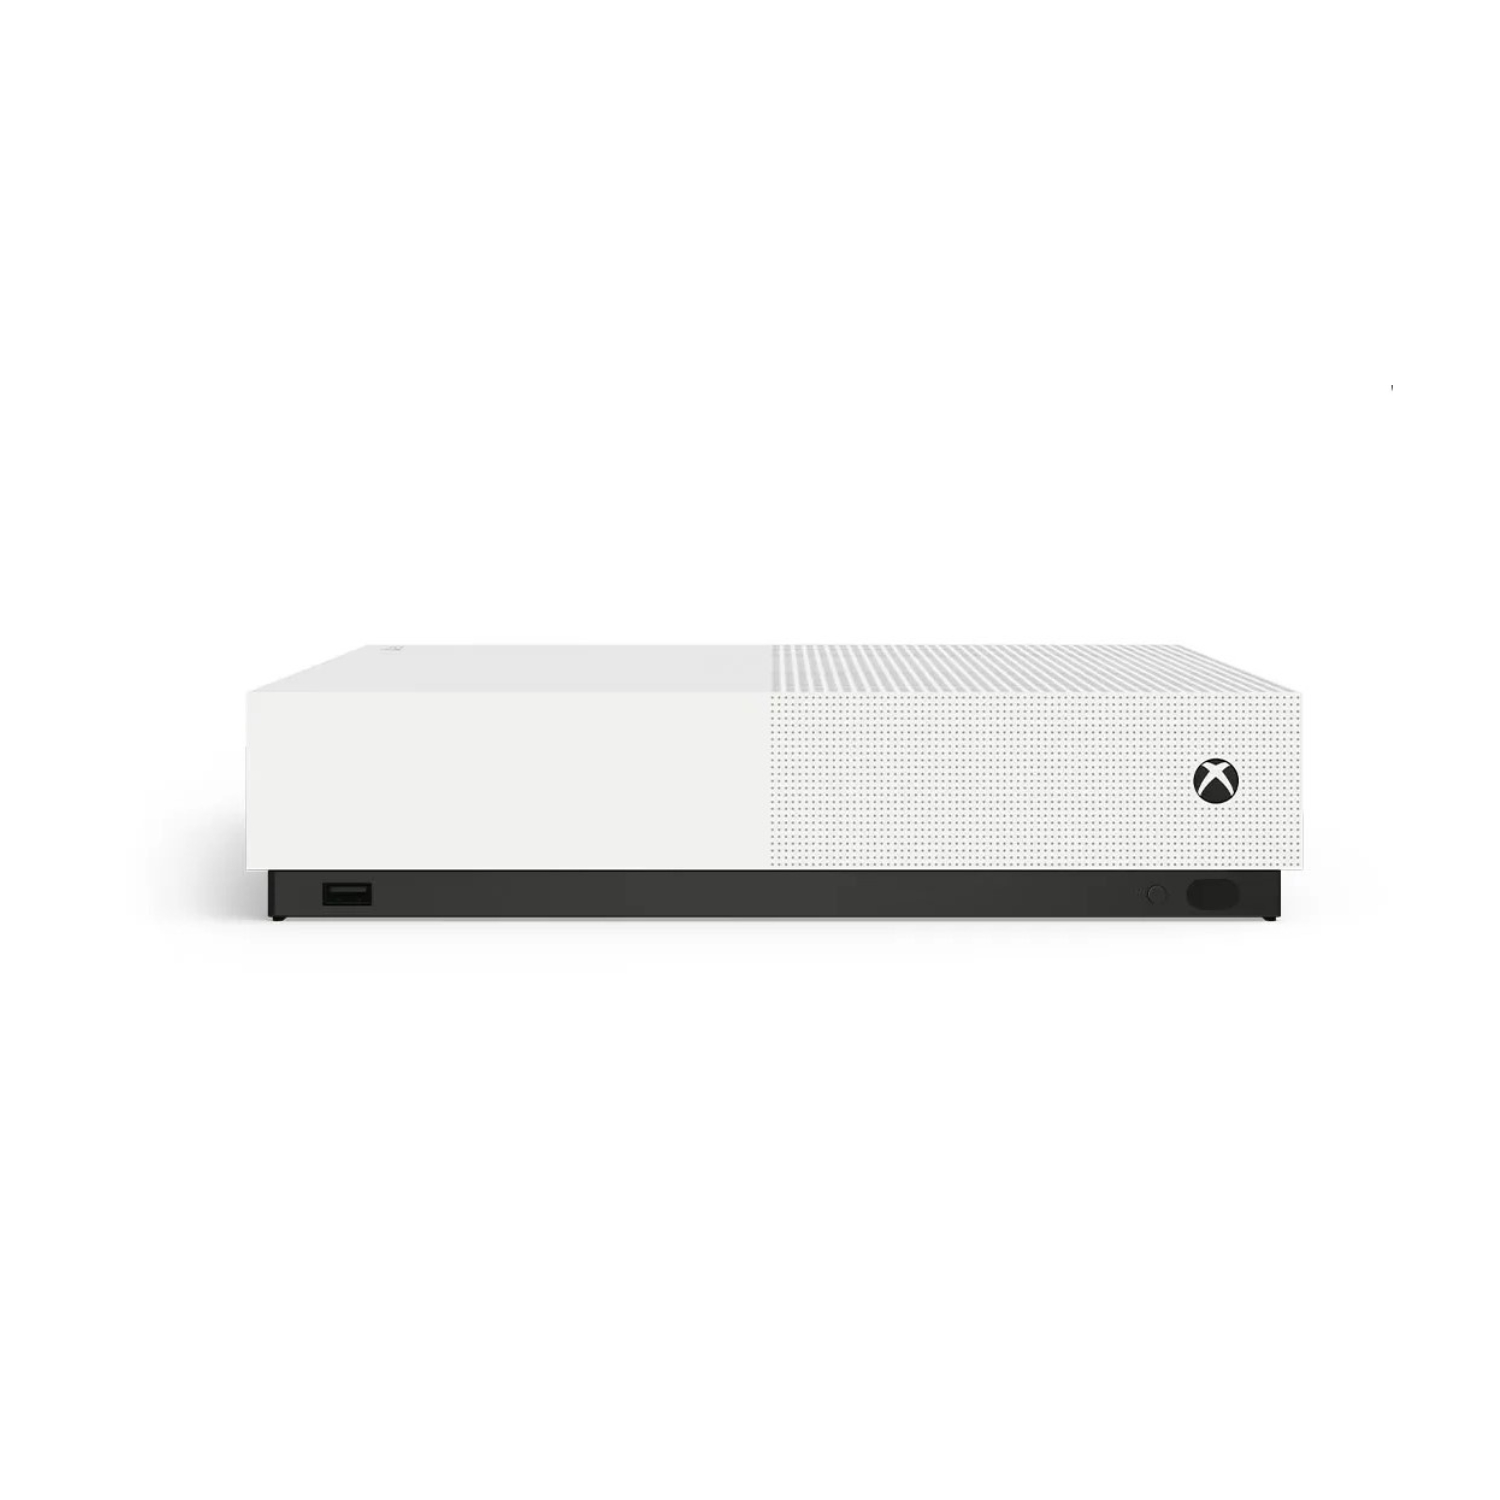 Microsoft Xbox One S All Digital Edition | 1TB | 1681 | Console Only